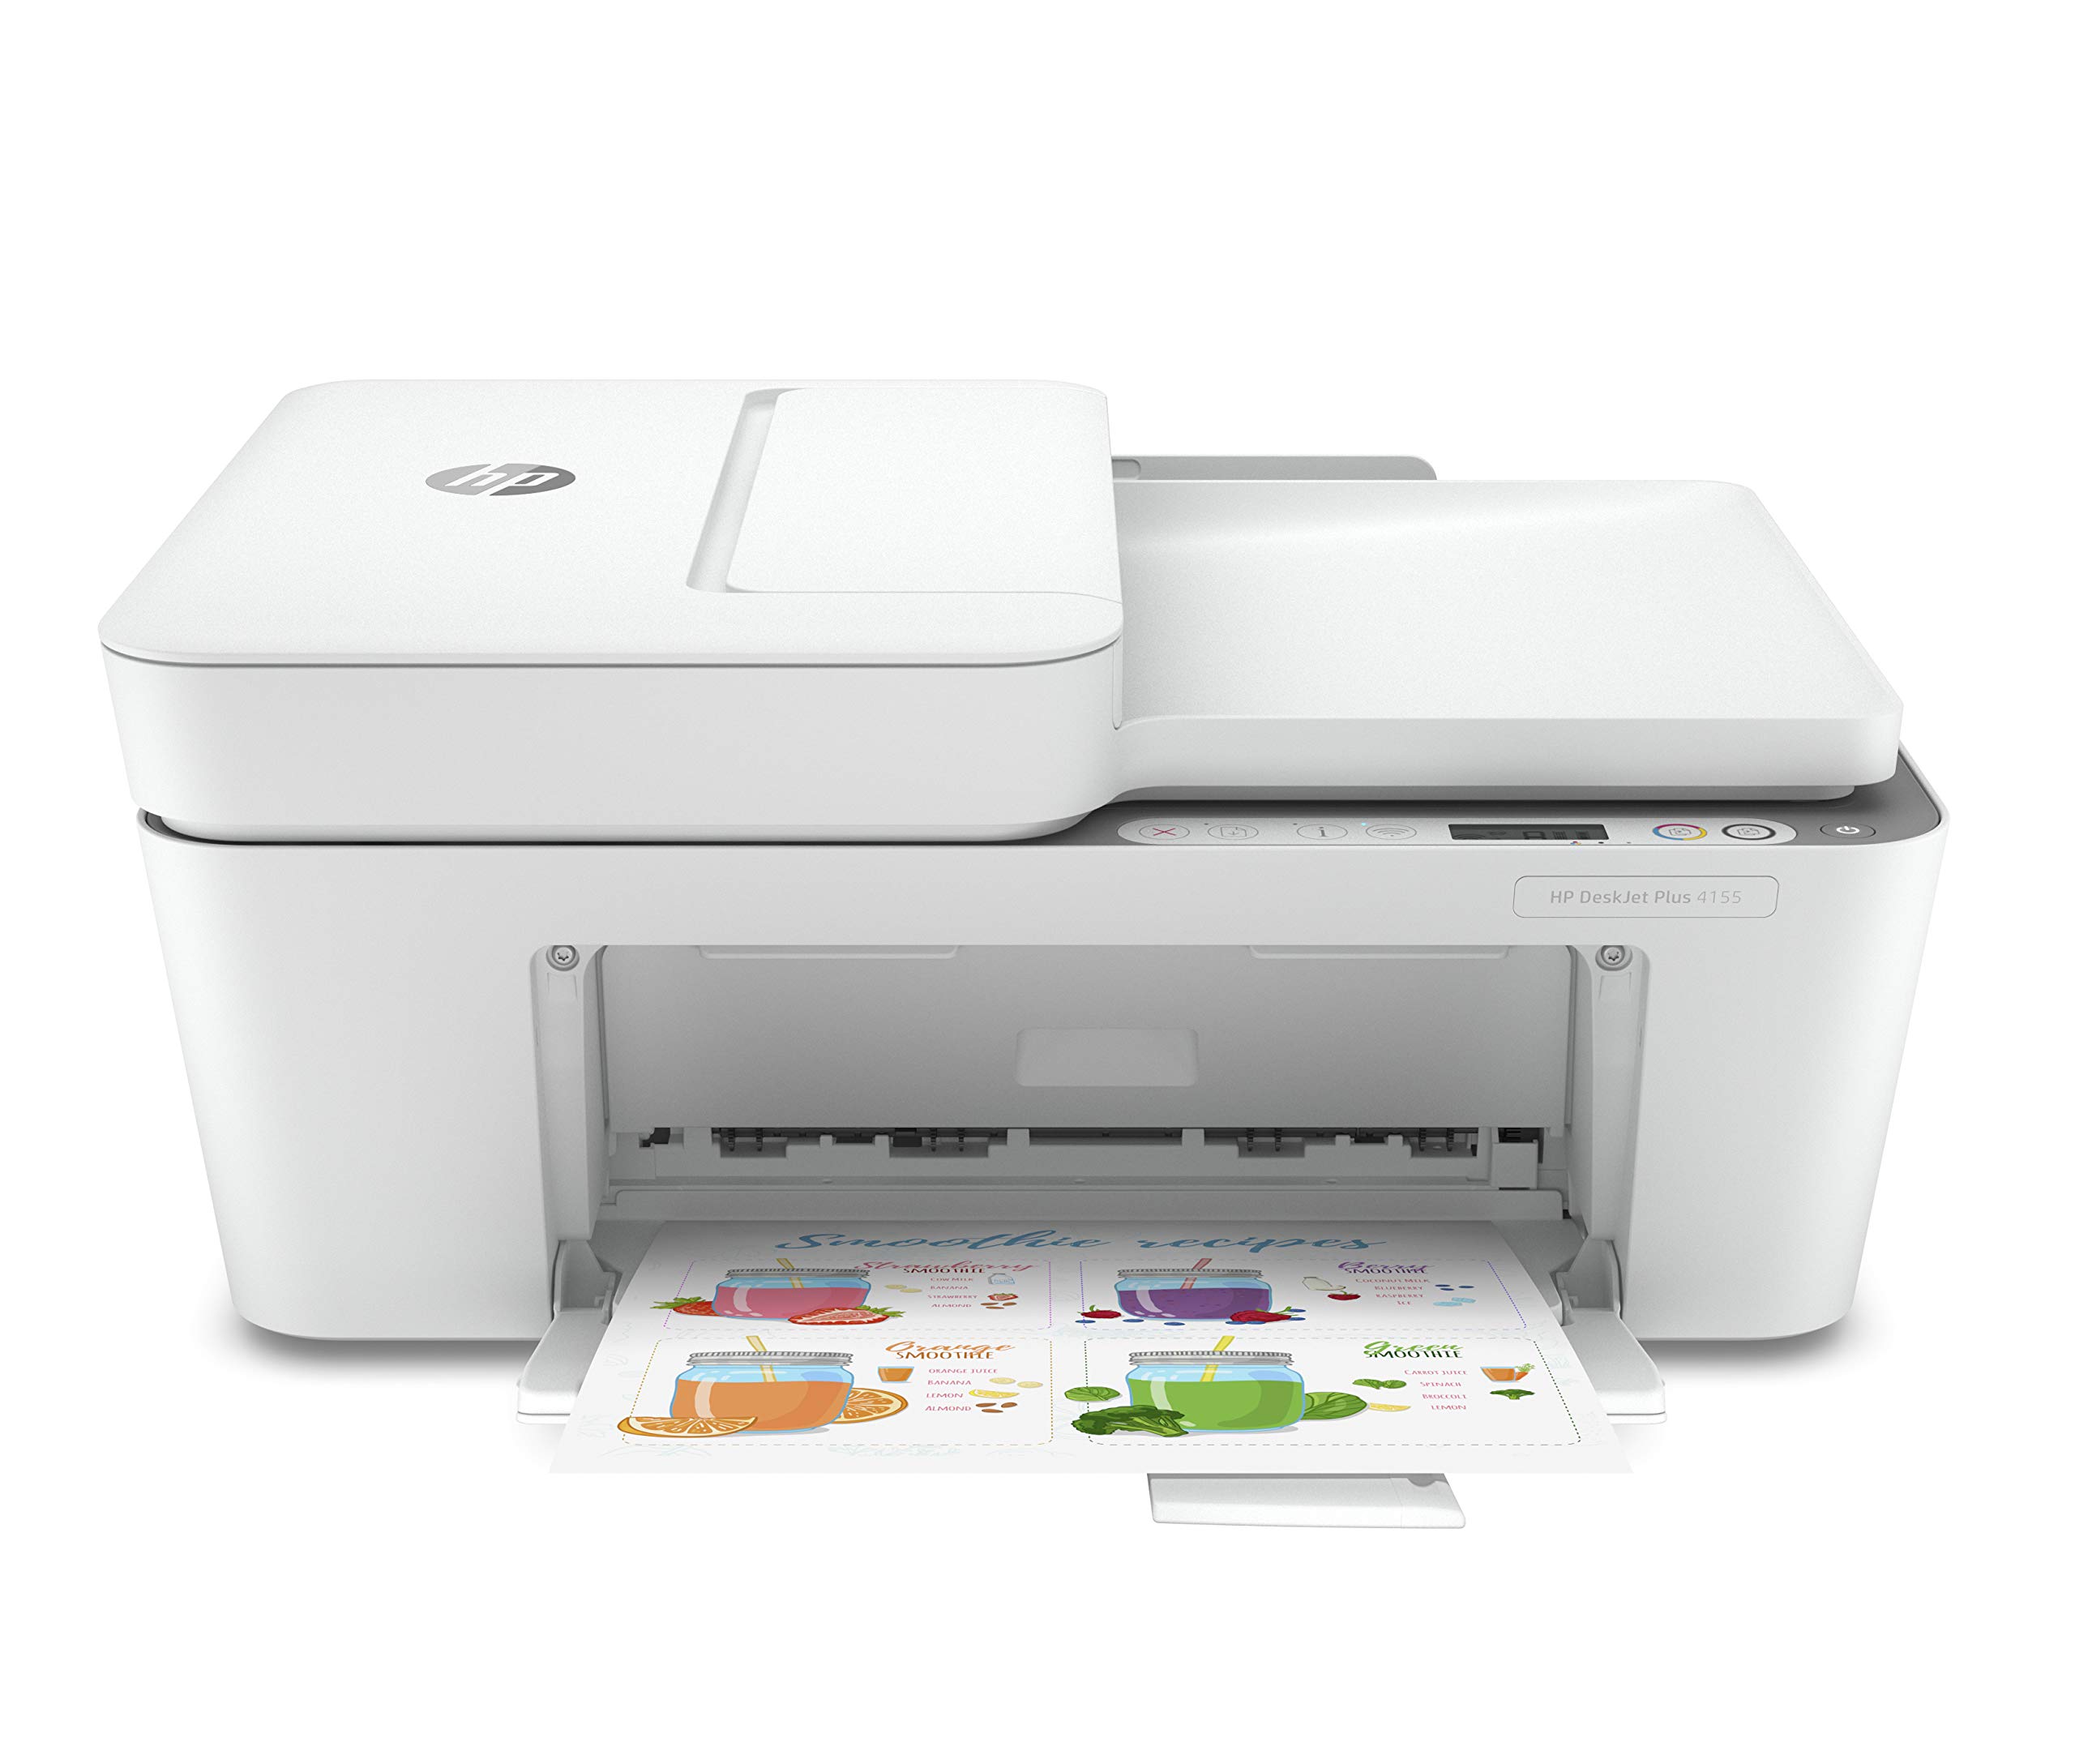 HP DeskJet Plus 4155 Wireless All-in-One Printer, Mobile Print, Scan & Copy, HP Instant Ink Ready, Auto Document Feeder, Works with Alexa (3XV13A)